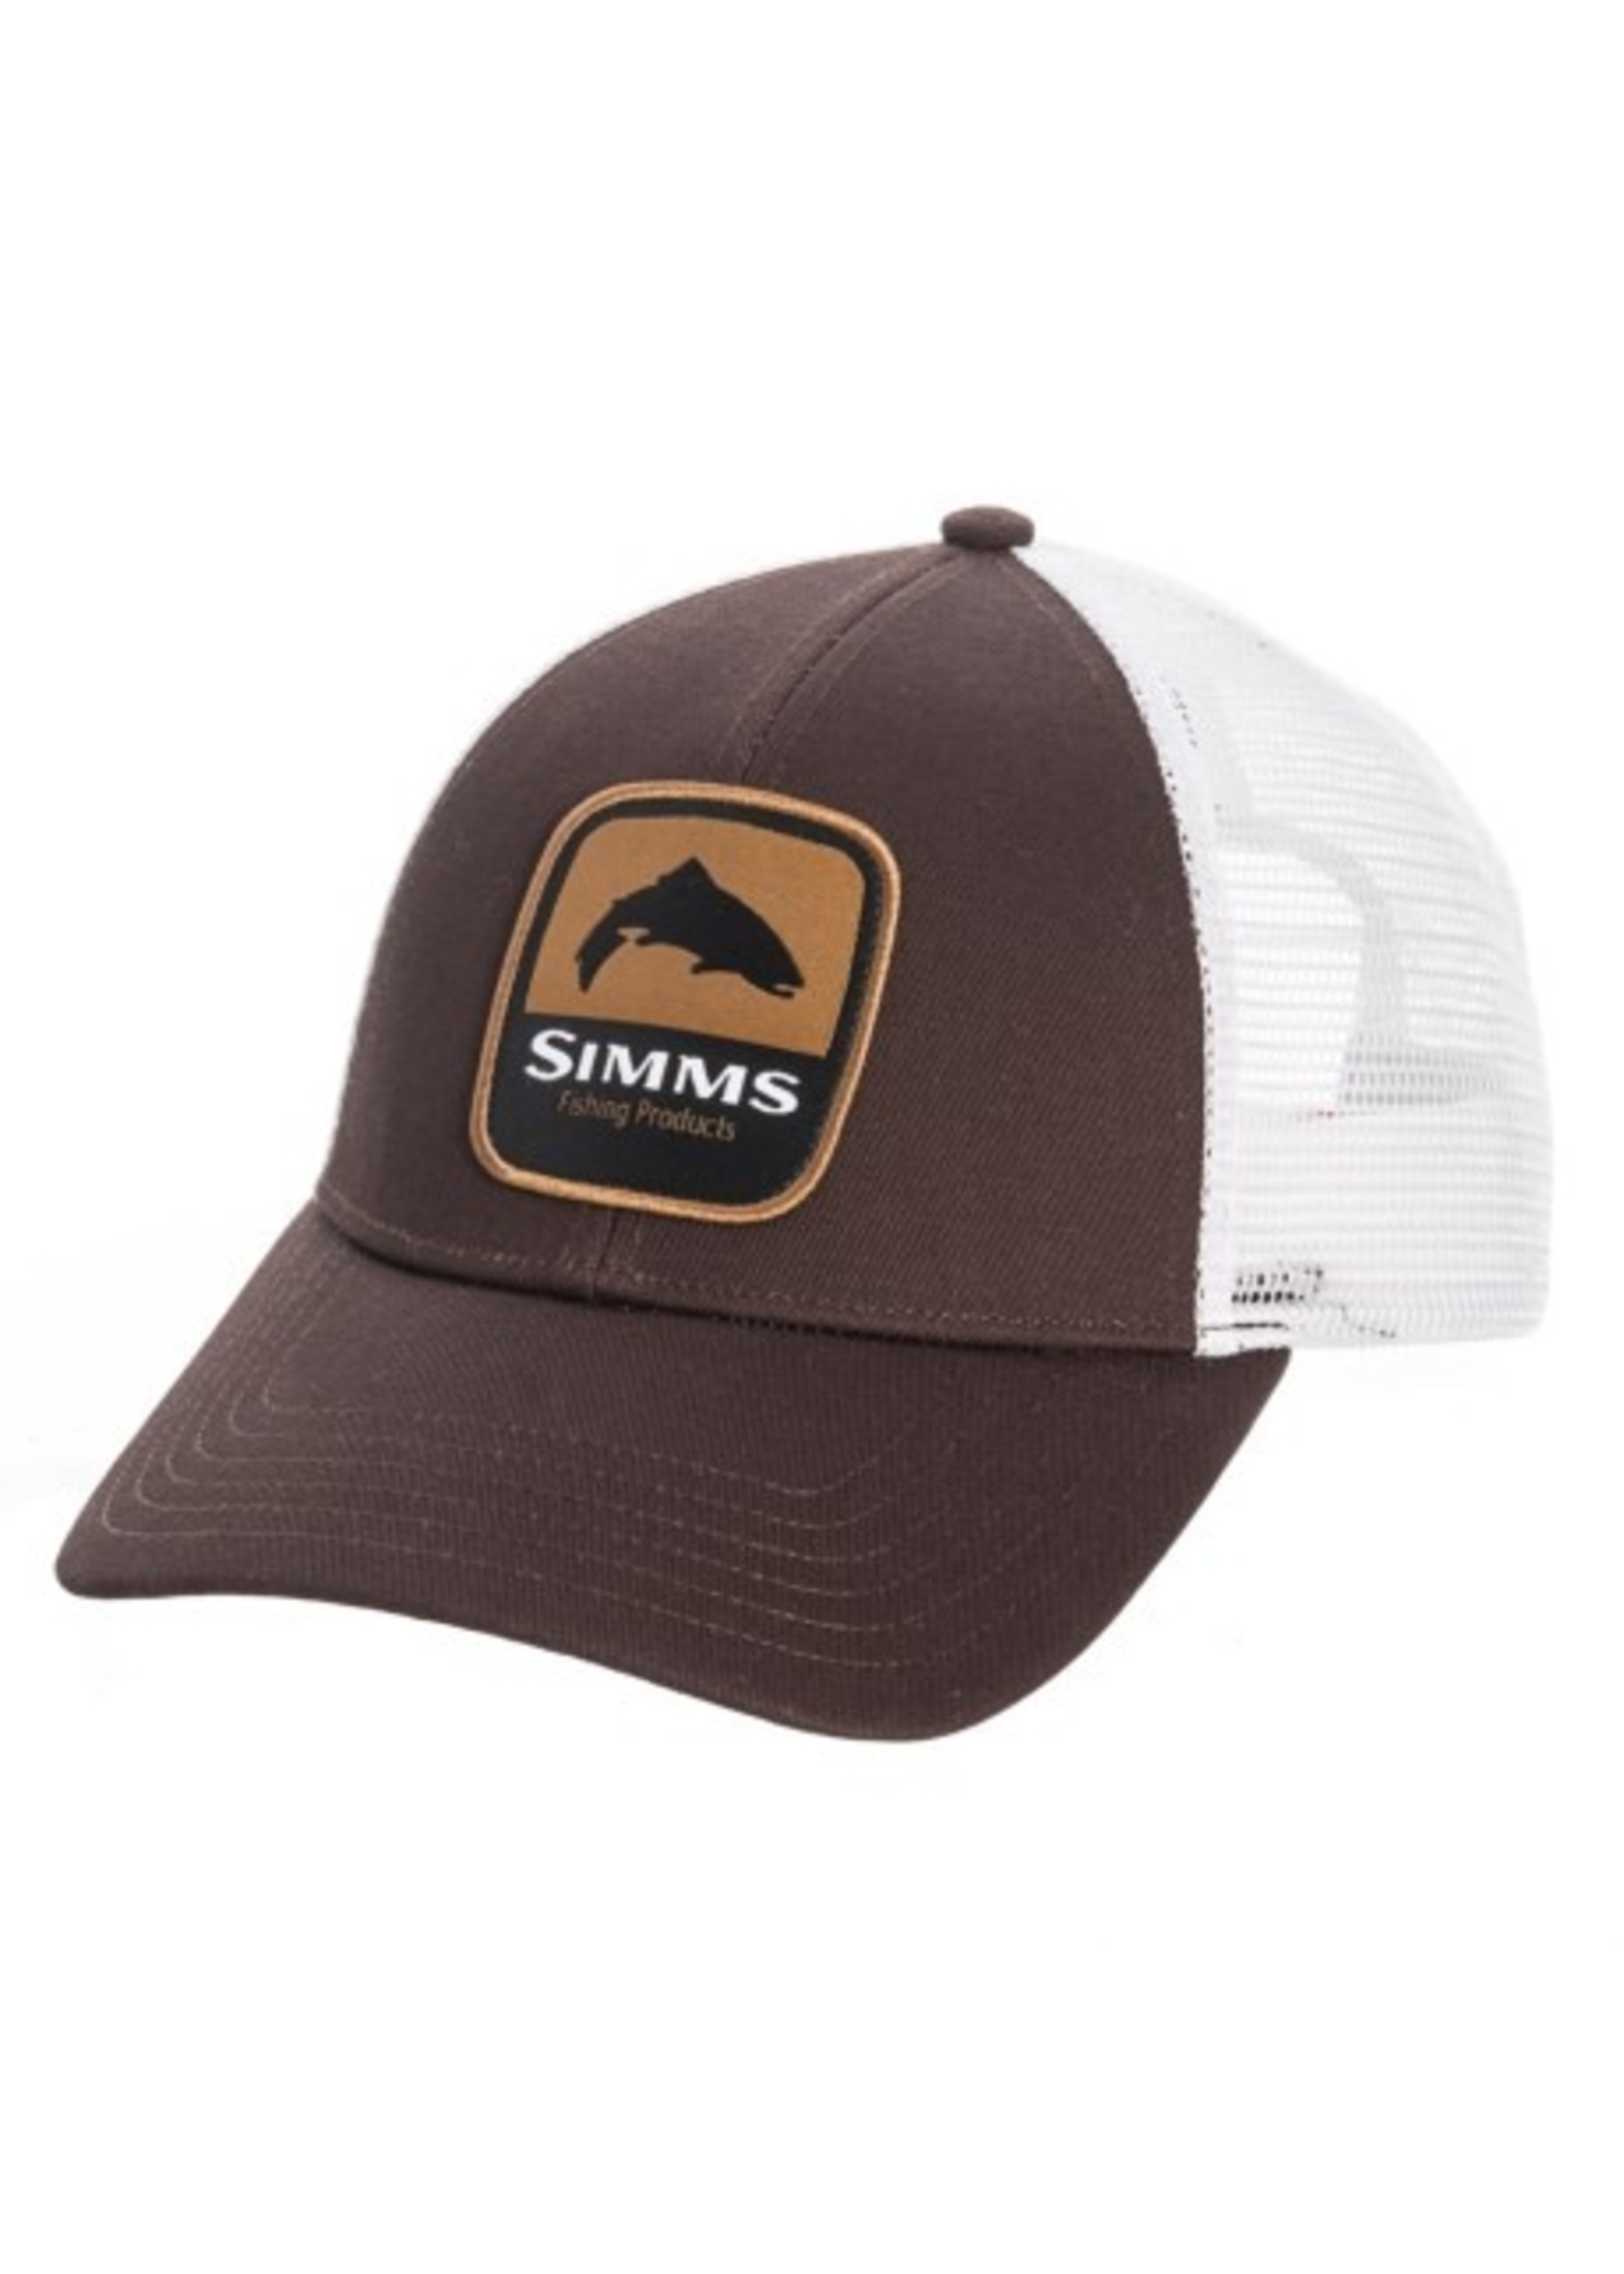 Simms Trout Patch Trucker Hat - Sweetwater Fly Shop